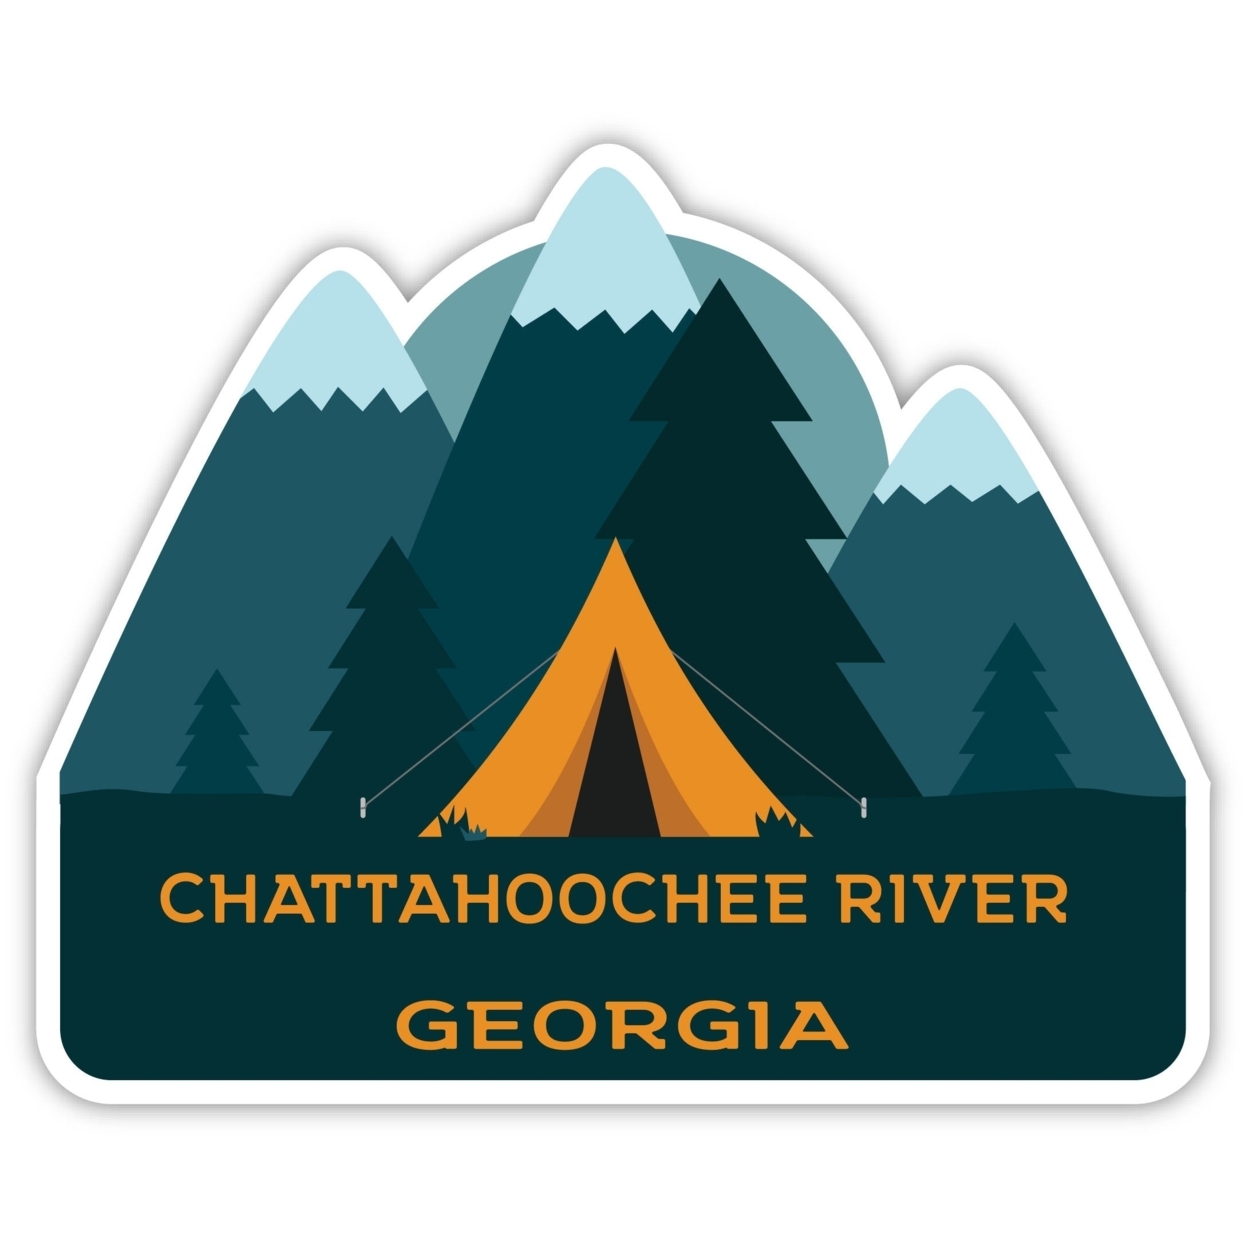 Chattahoochee River Georgia Souvenir Decorative Stickers (Choose Theme And Size) - 4-Pack, 4-Inch, Tent